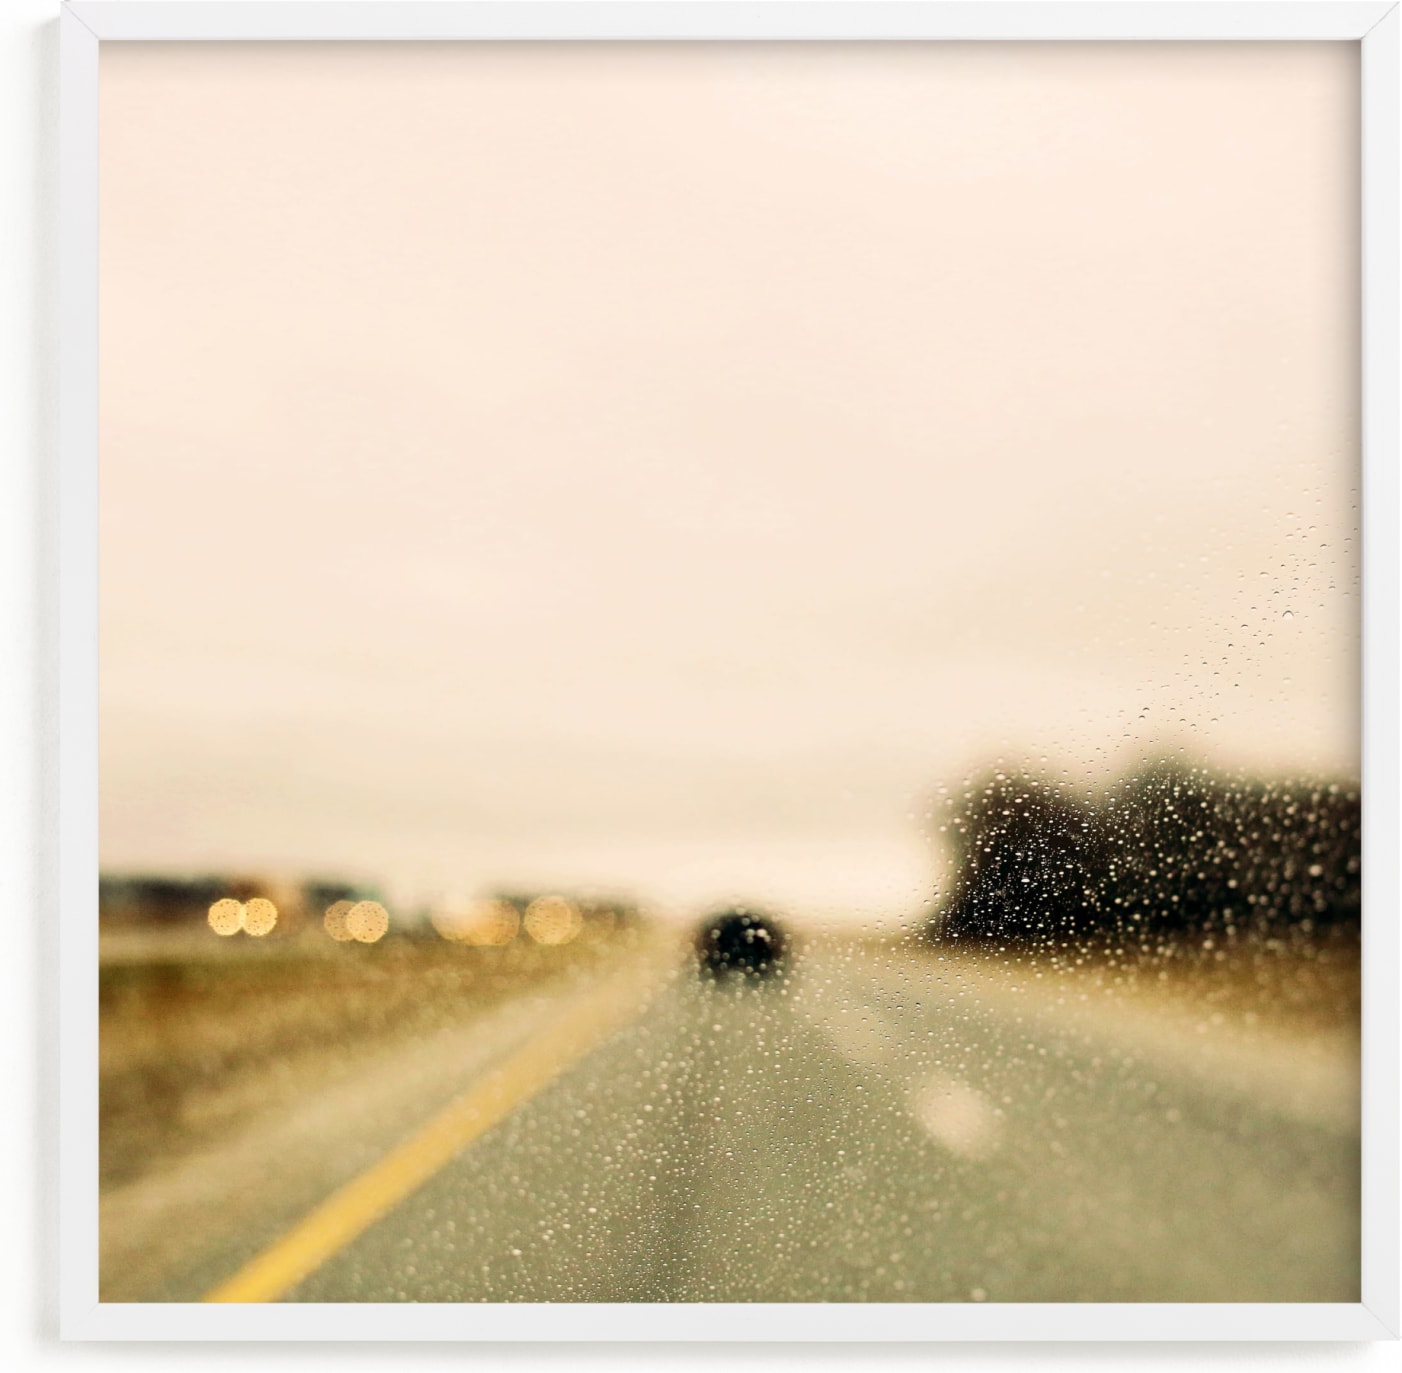 This is a brown art by ALICIA BOCK called Road and Rain #2.